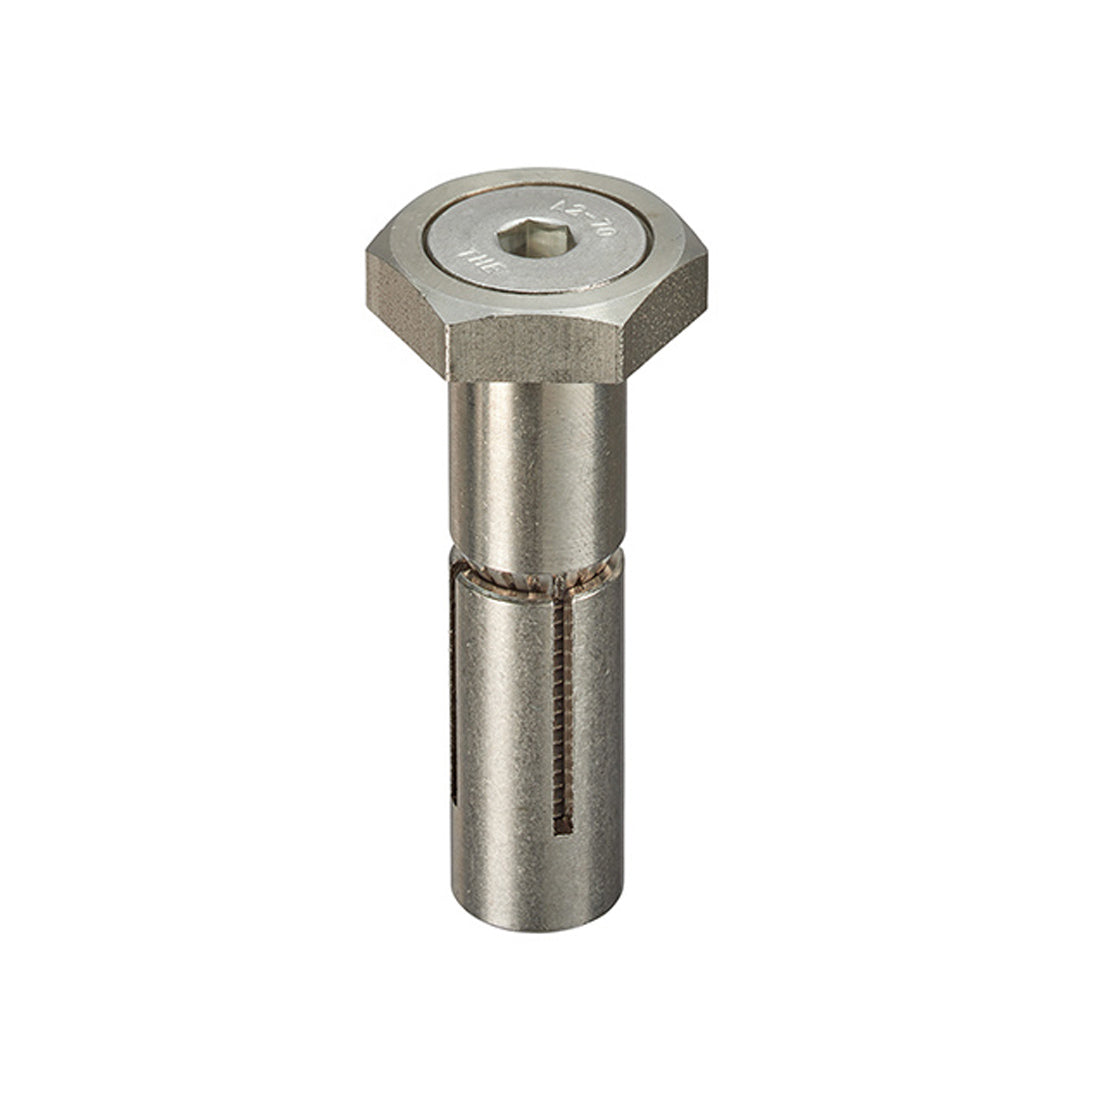 A2-70 Stainless Steel Thin Wall Blind Bolts - 10 x 40mm